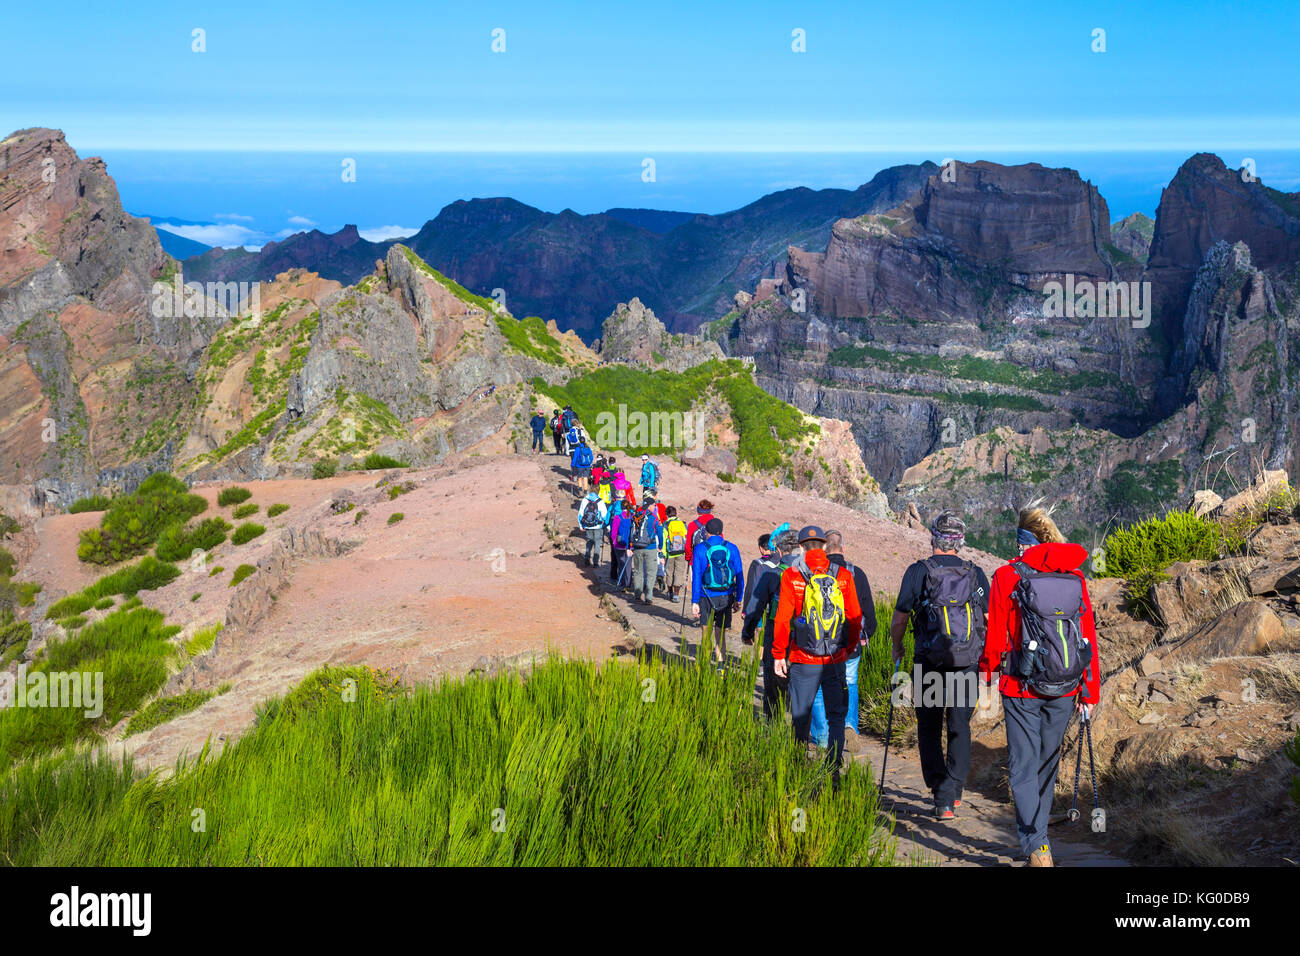 Group of hikers taking off from Pico do Arieiro on the trail towards Pico Ruivo - the highest peak in Madeira, Portugal Stock Photo